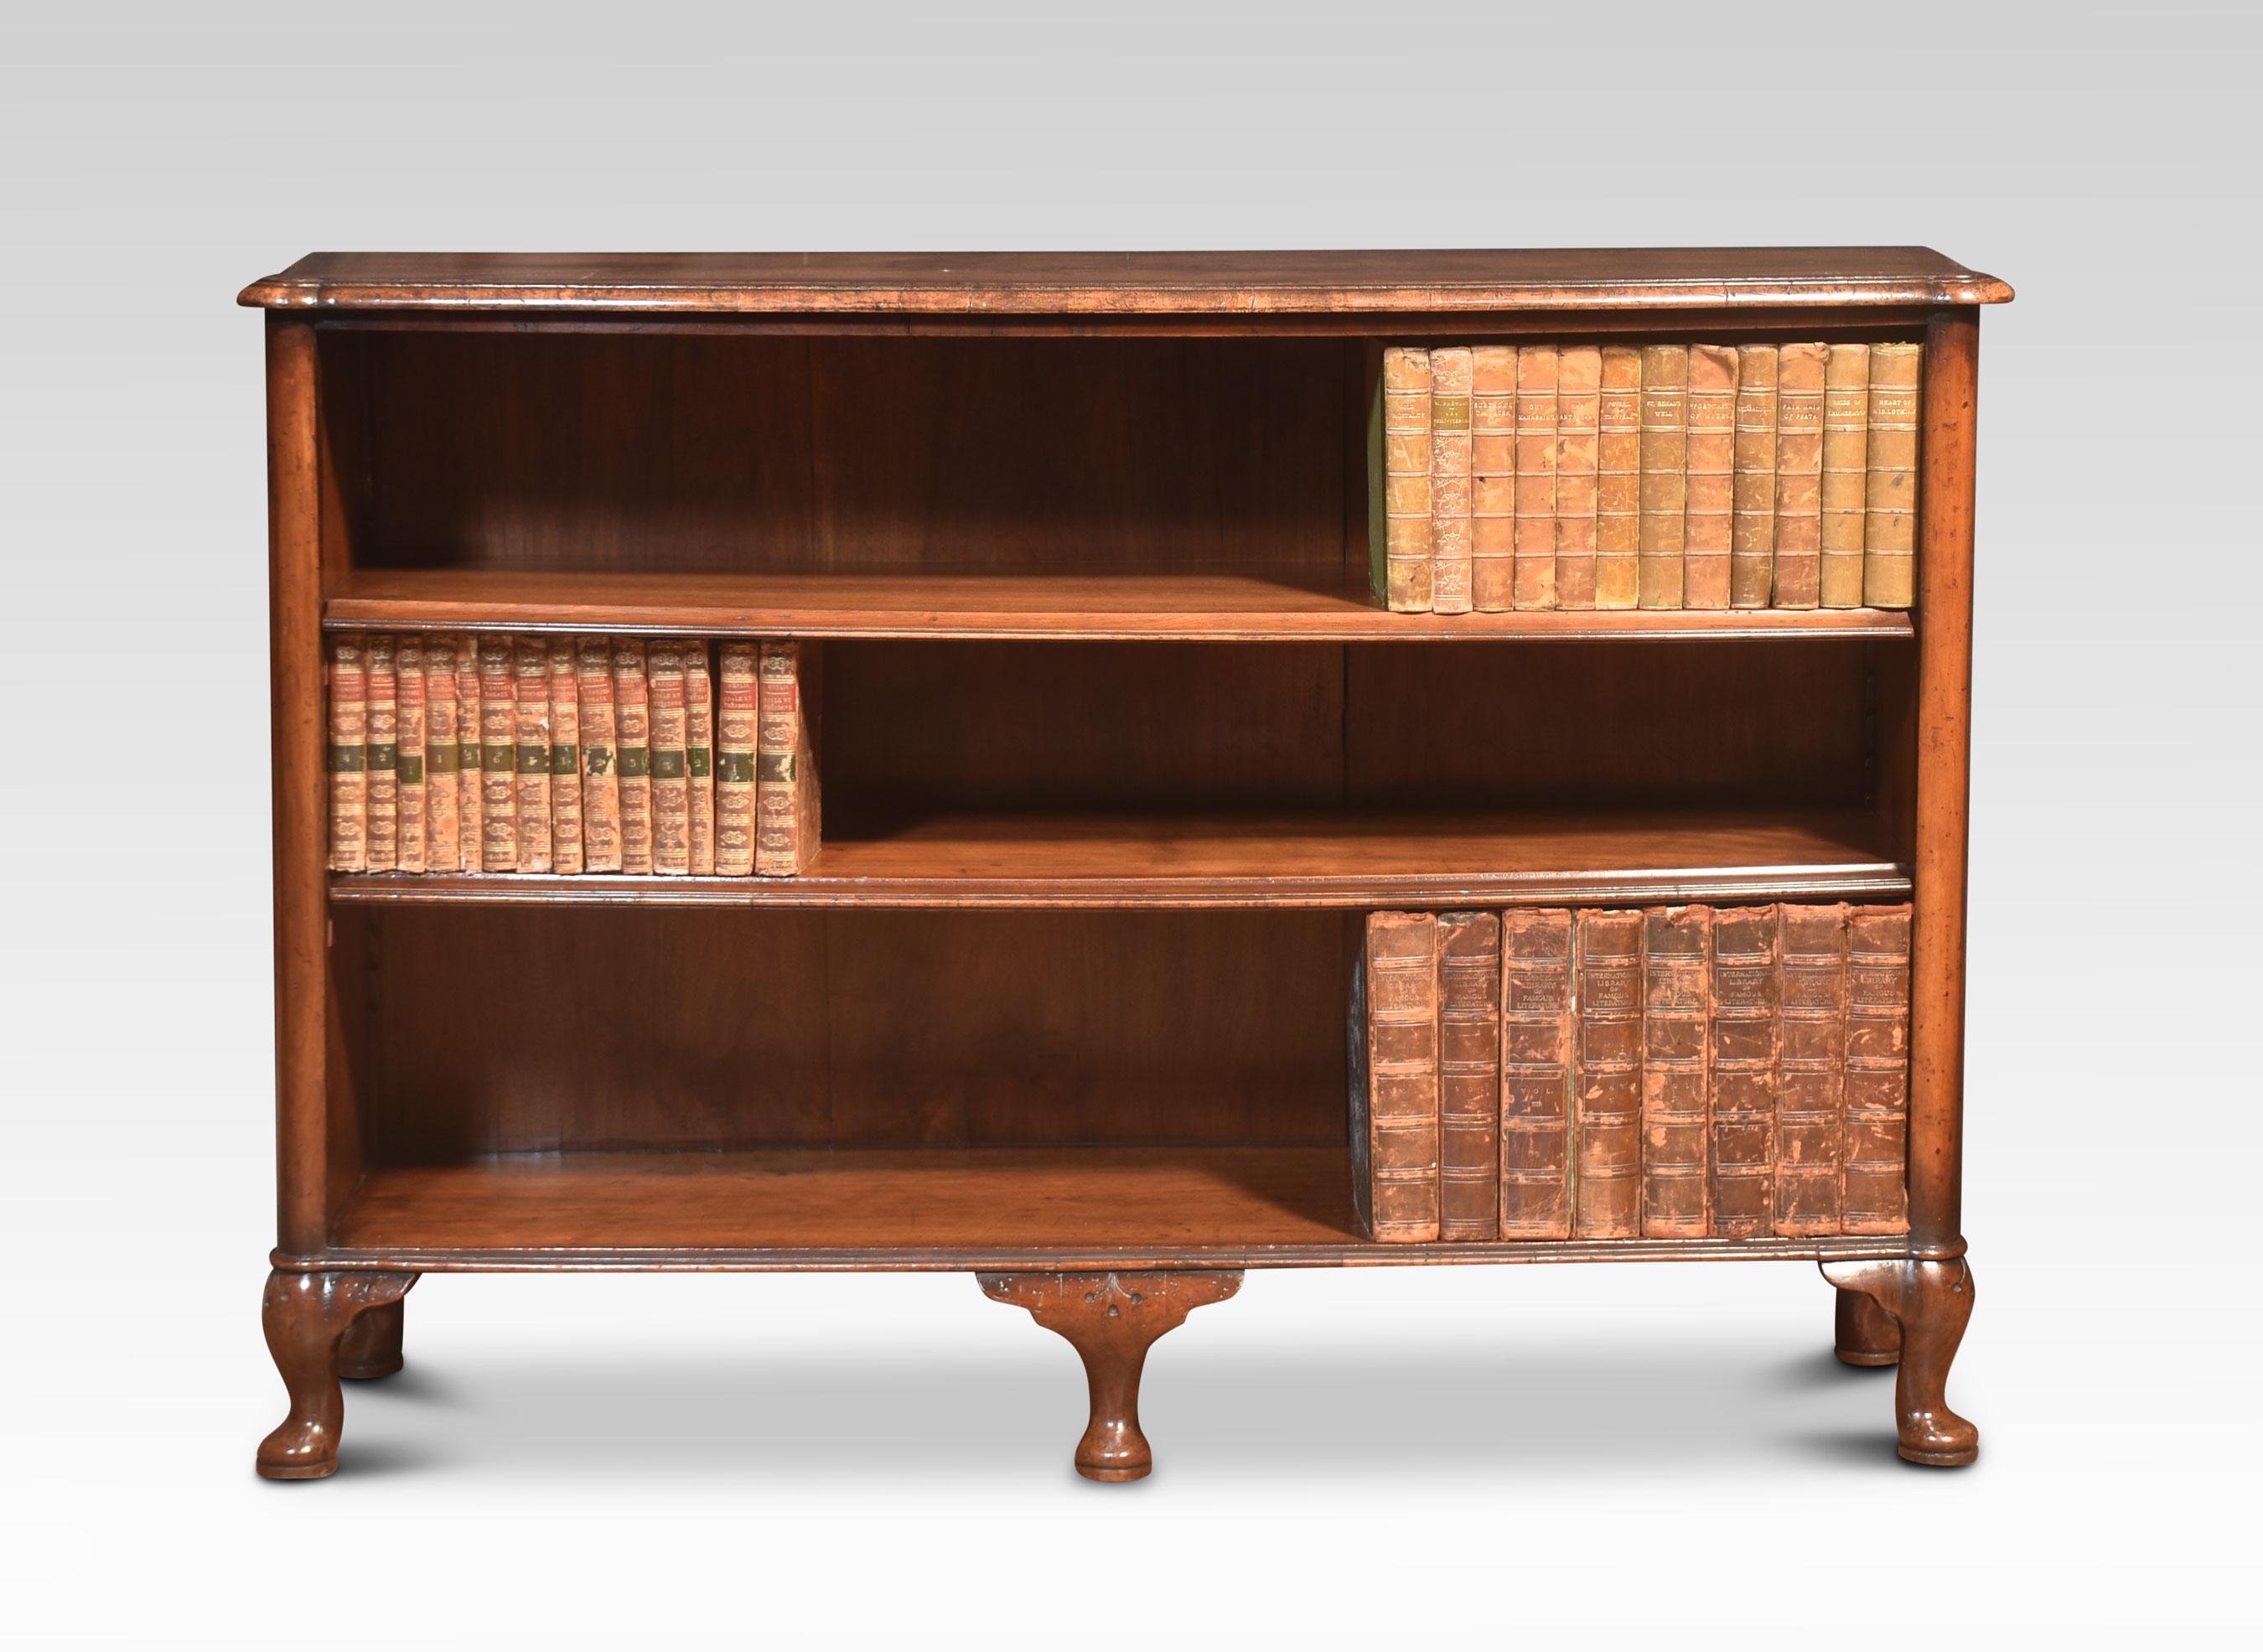 Walnut open bookcase, the rectangular well-figured cross banded bow fronted top above-moulded frieze to the adjustable shelved interior, all raised up on cabriole legs.
Dimensions
Height 34 Inches
Width 50.5 Inches
Depth 15.5 Inches